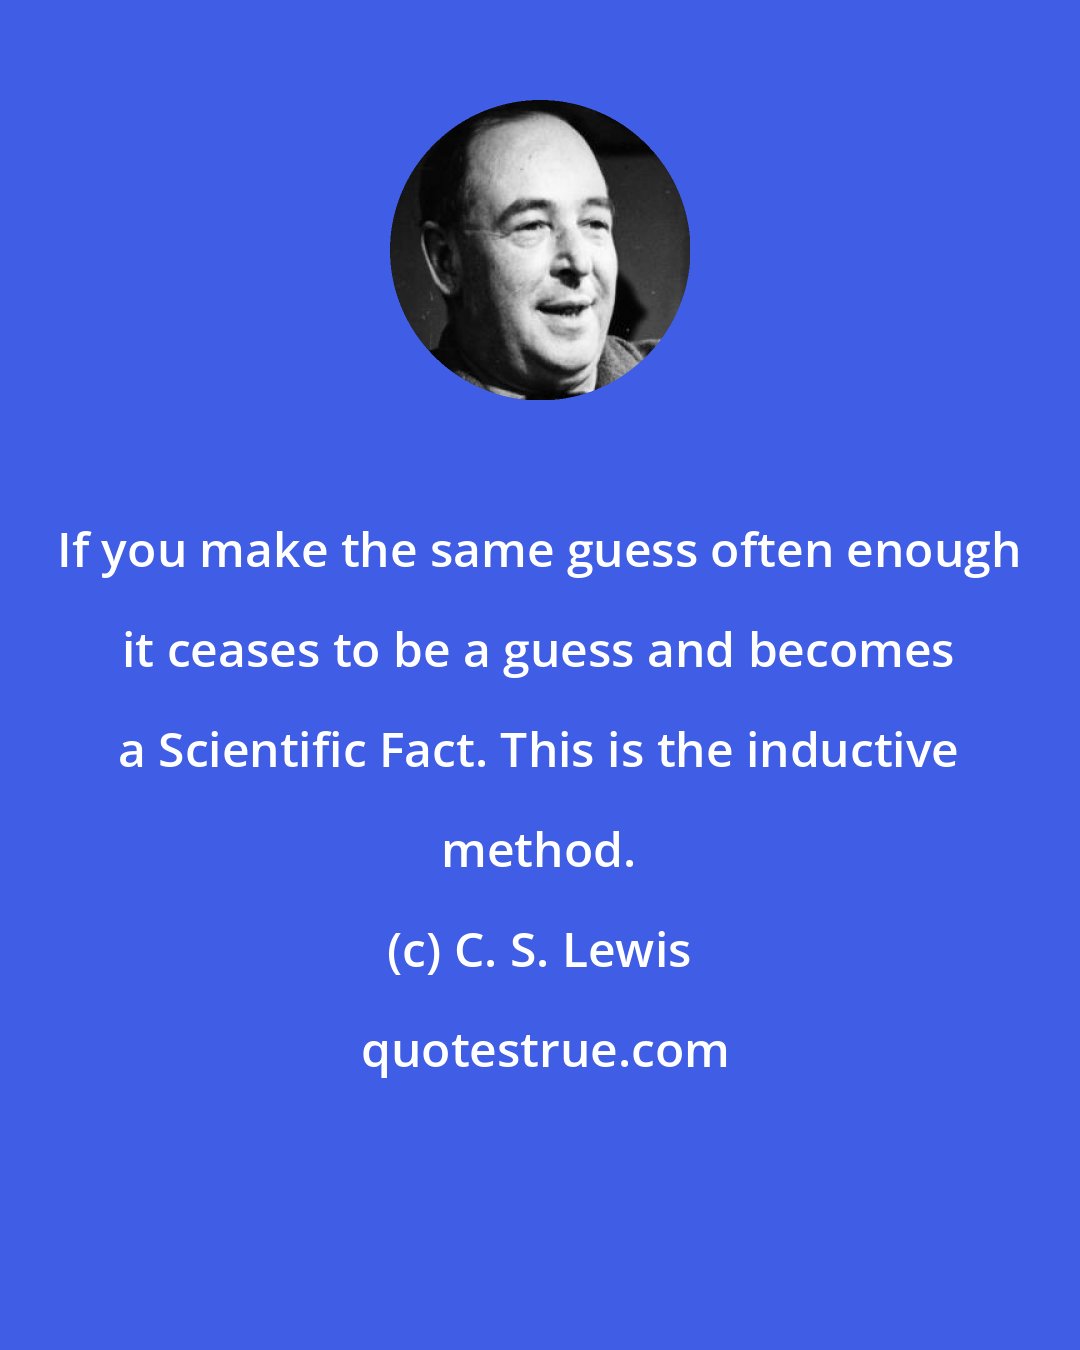 C. S. Lewis: If you make the same guess often enough it ceases to be a guess and becomes a Scientific Fact. This is the inductive method.